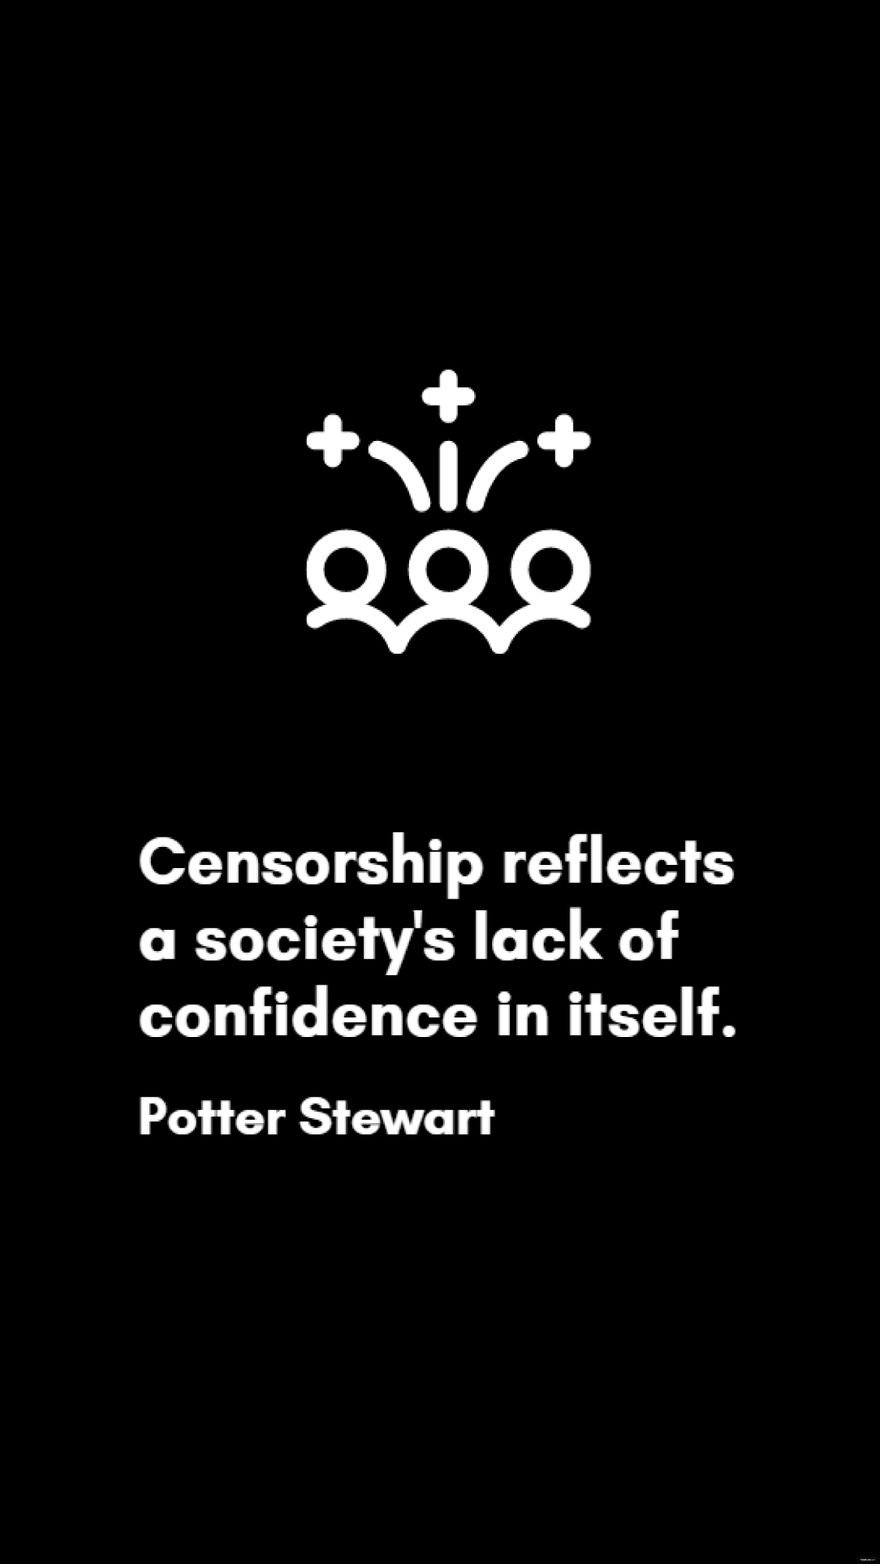 Potter Stewart - Censorship reflects a society's lack of confidence in itself.